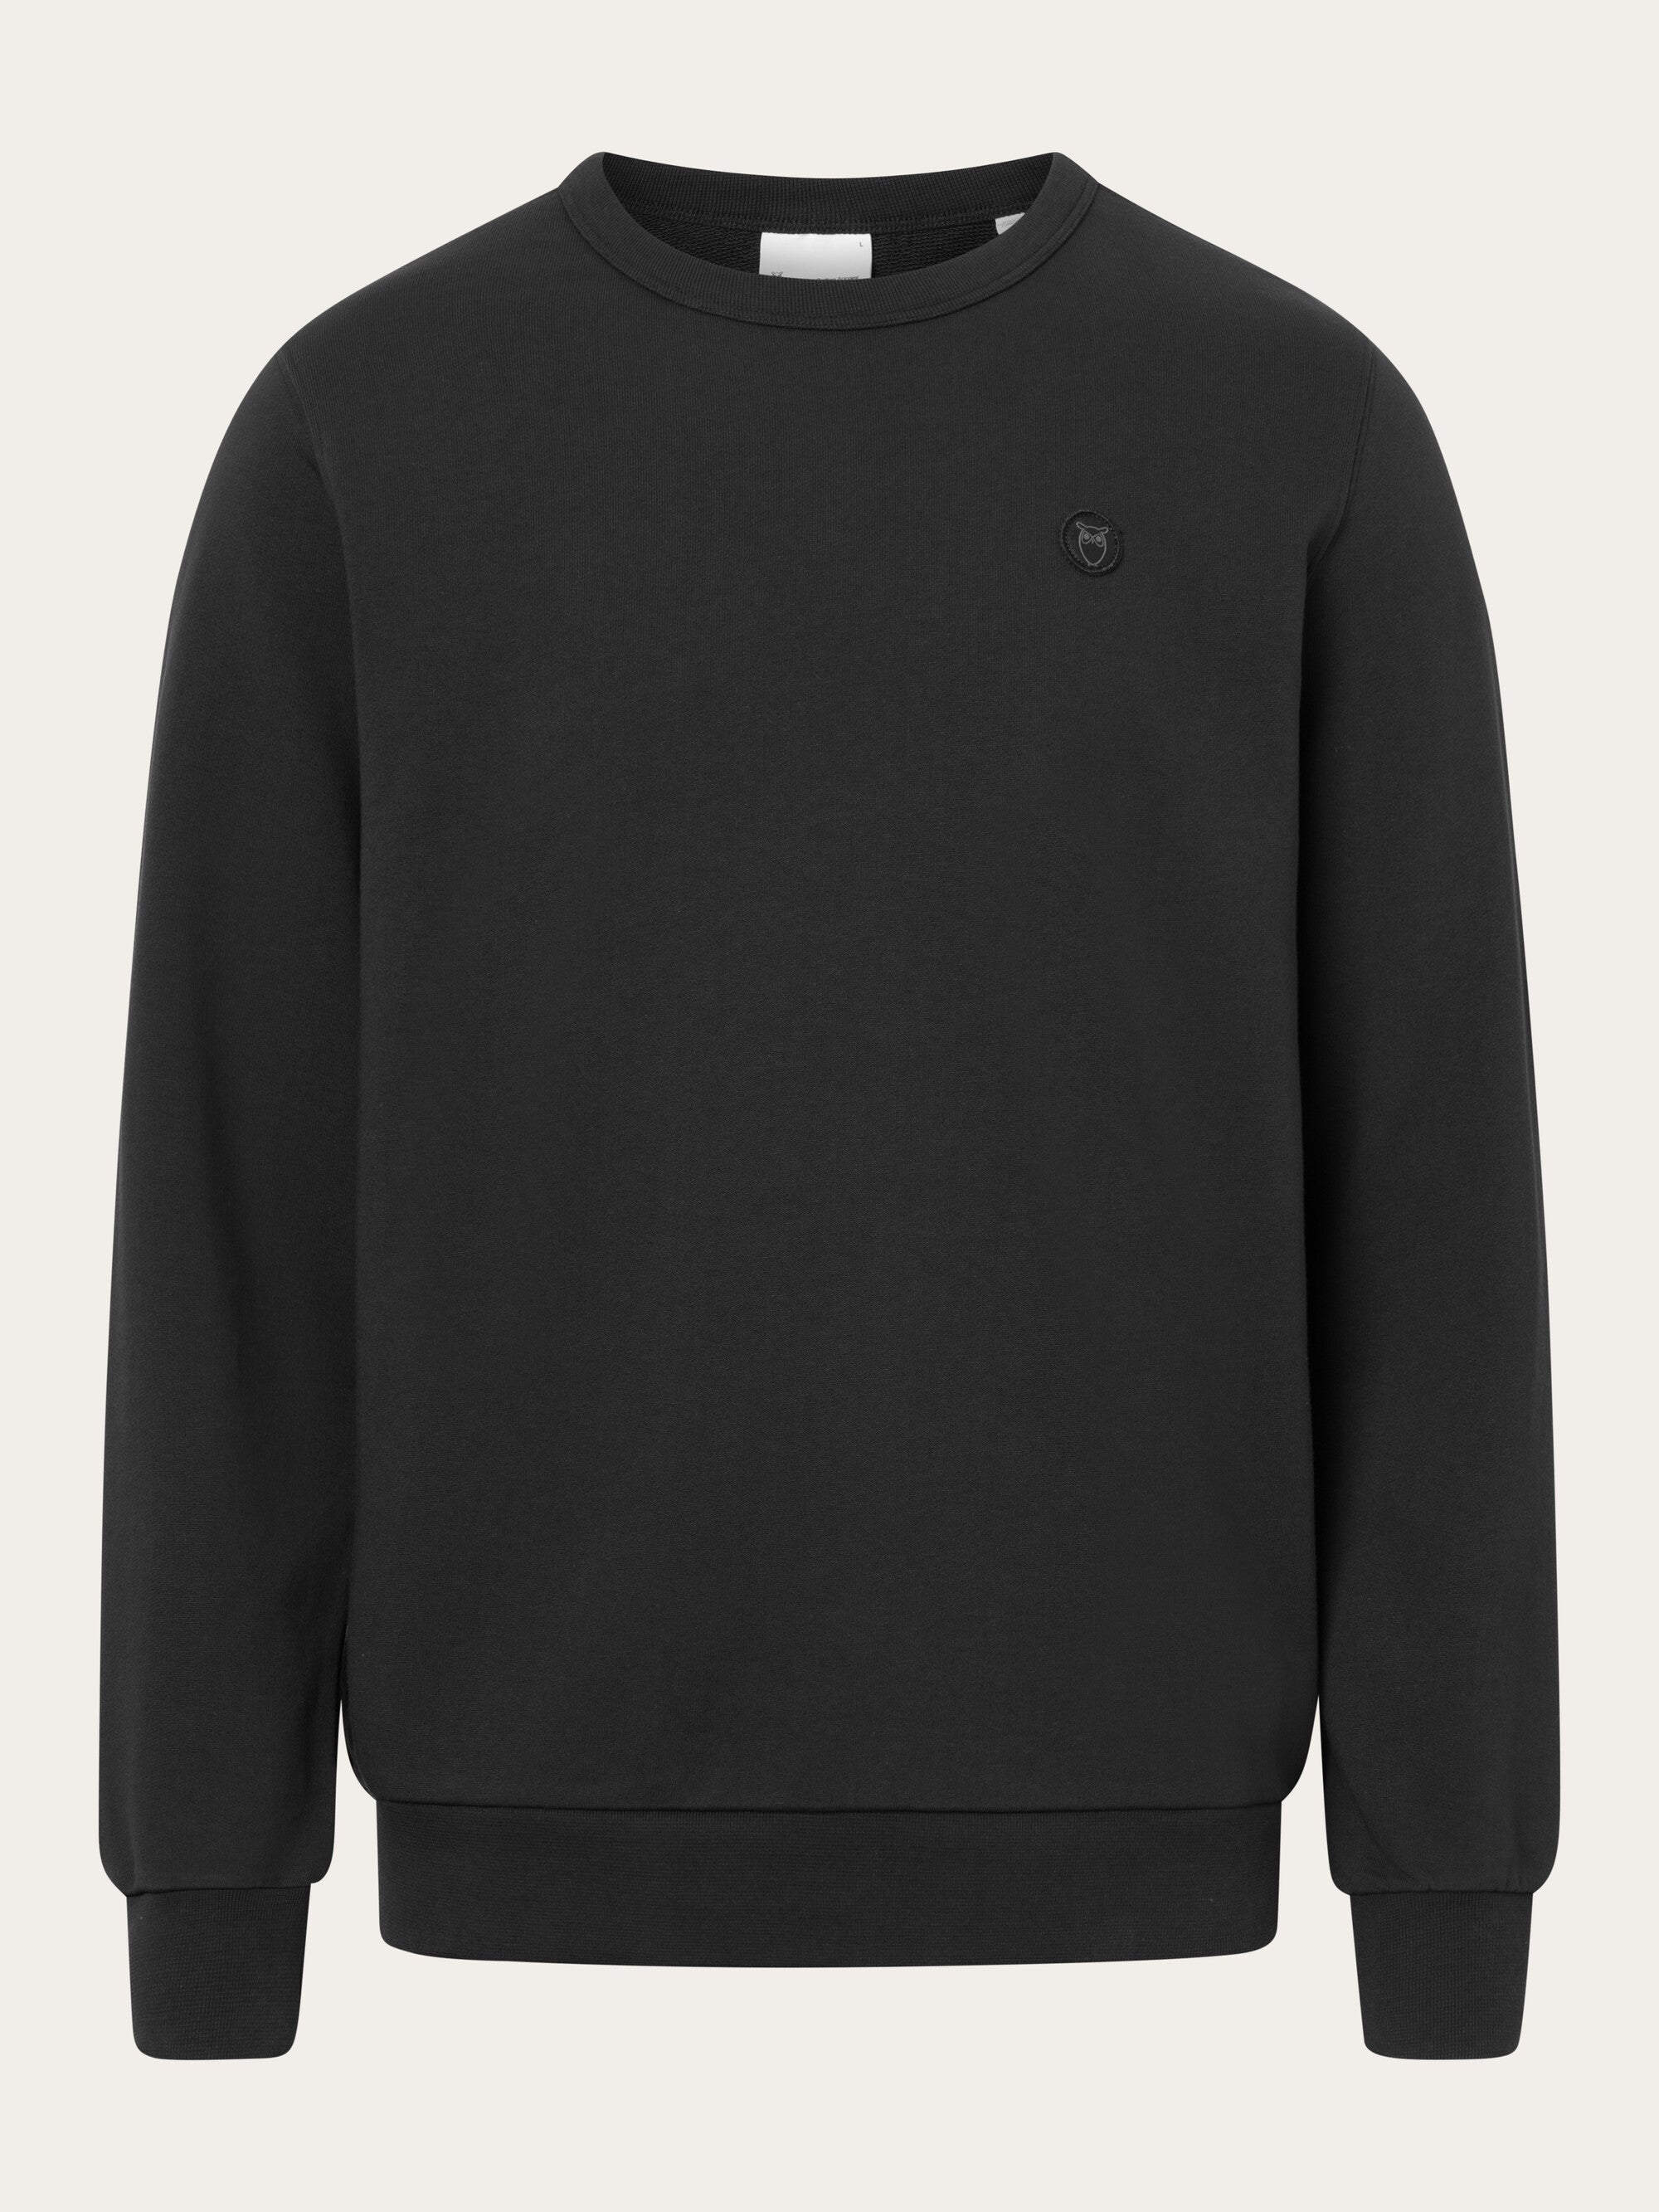 from Jet badge Buy KnowledgeCotton - Basic - Apparel® sweat Black